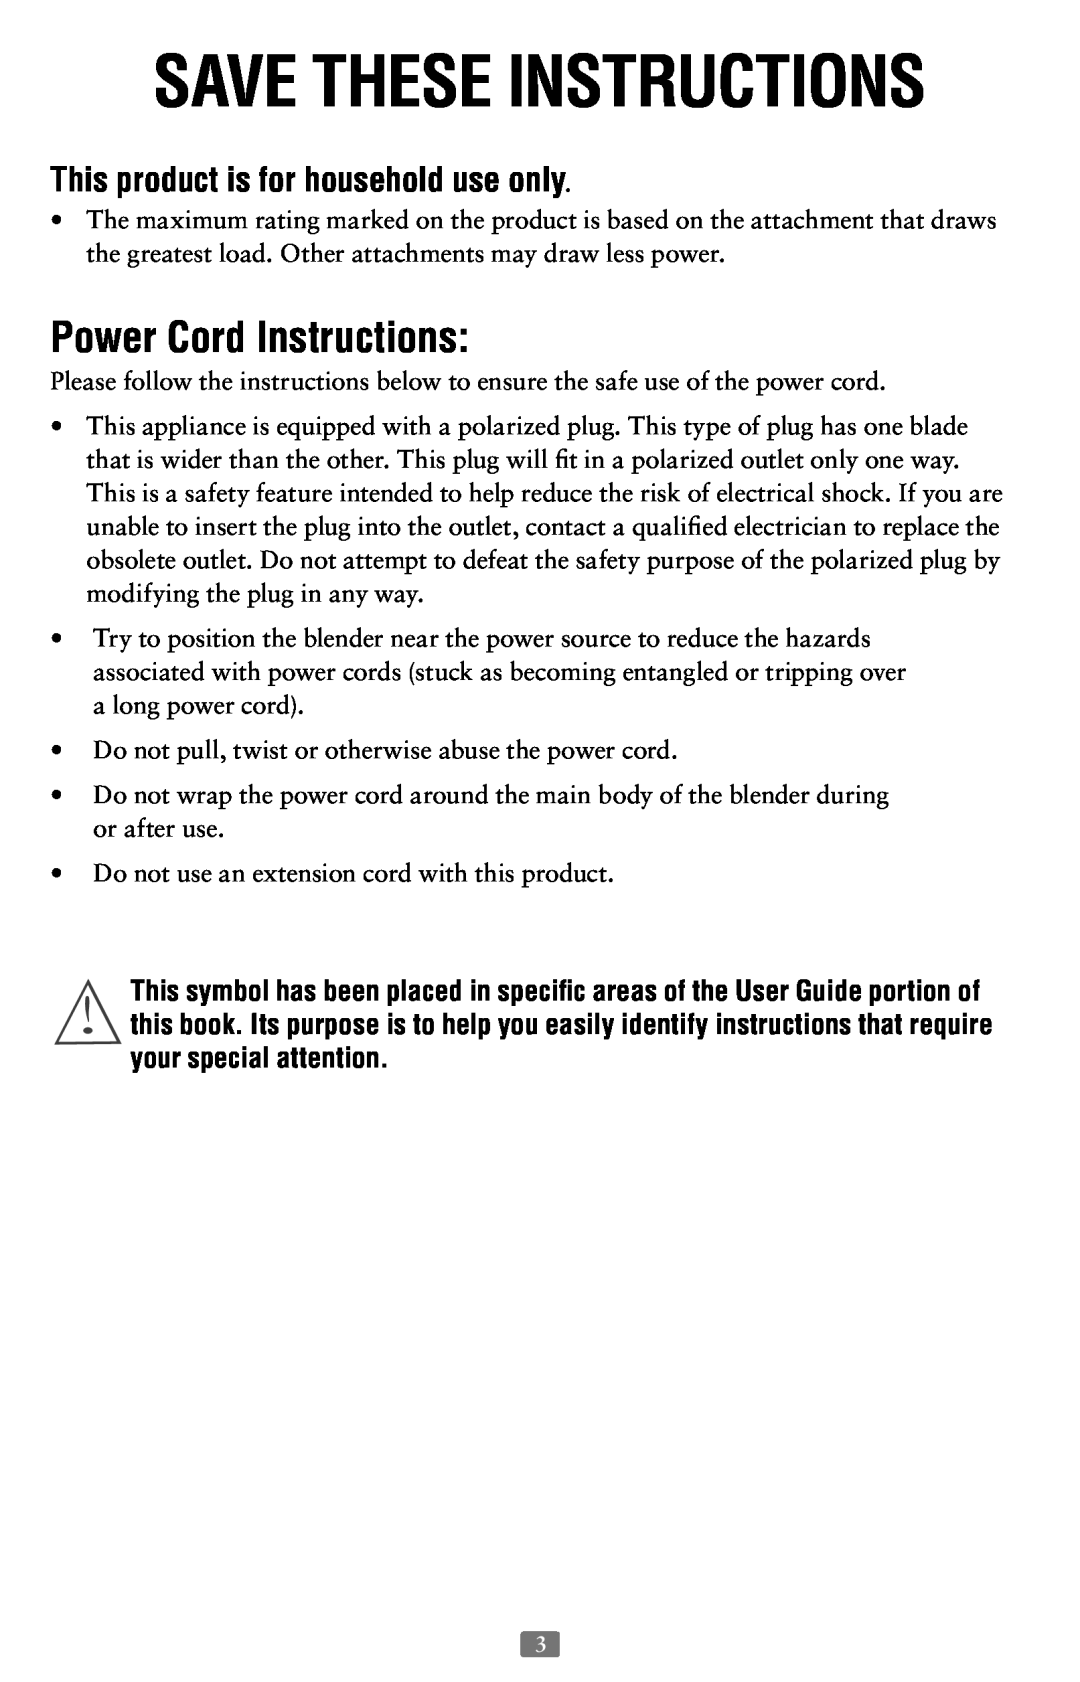 Oster 126477-001-000 Power Cord Instructions, This product is for household use only, Save These Instructions 